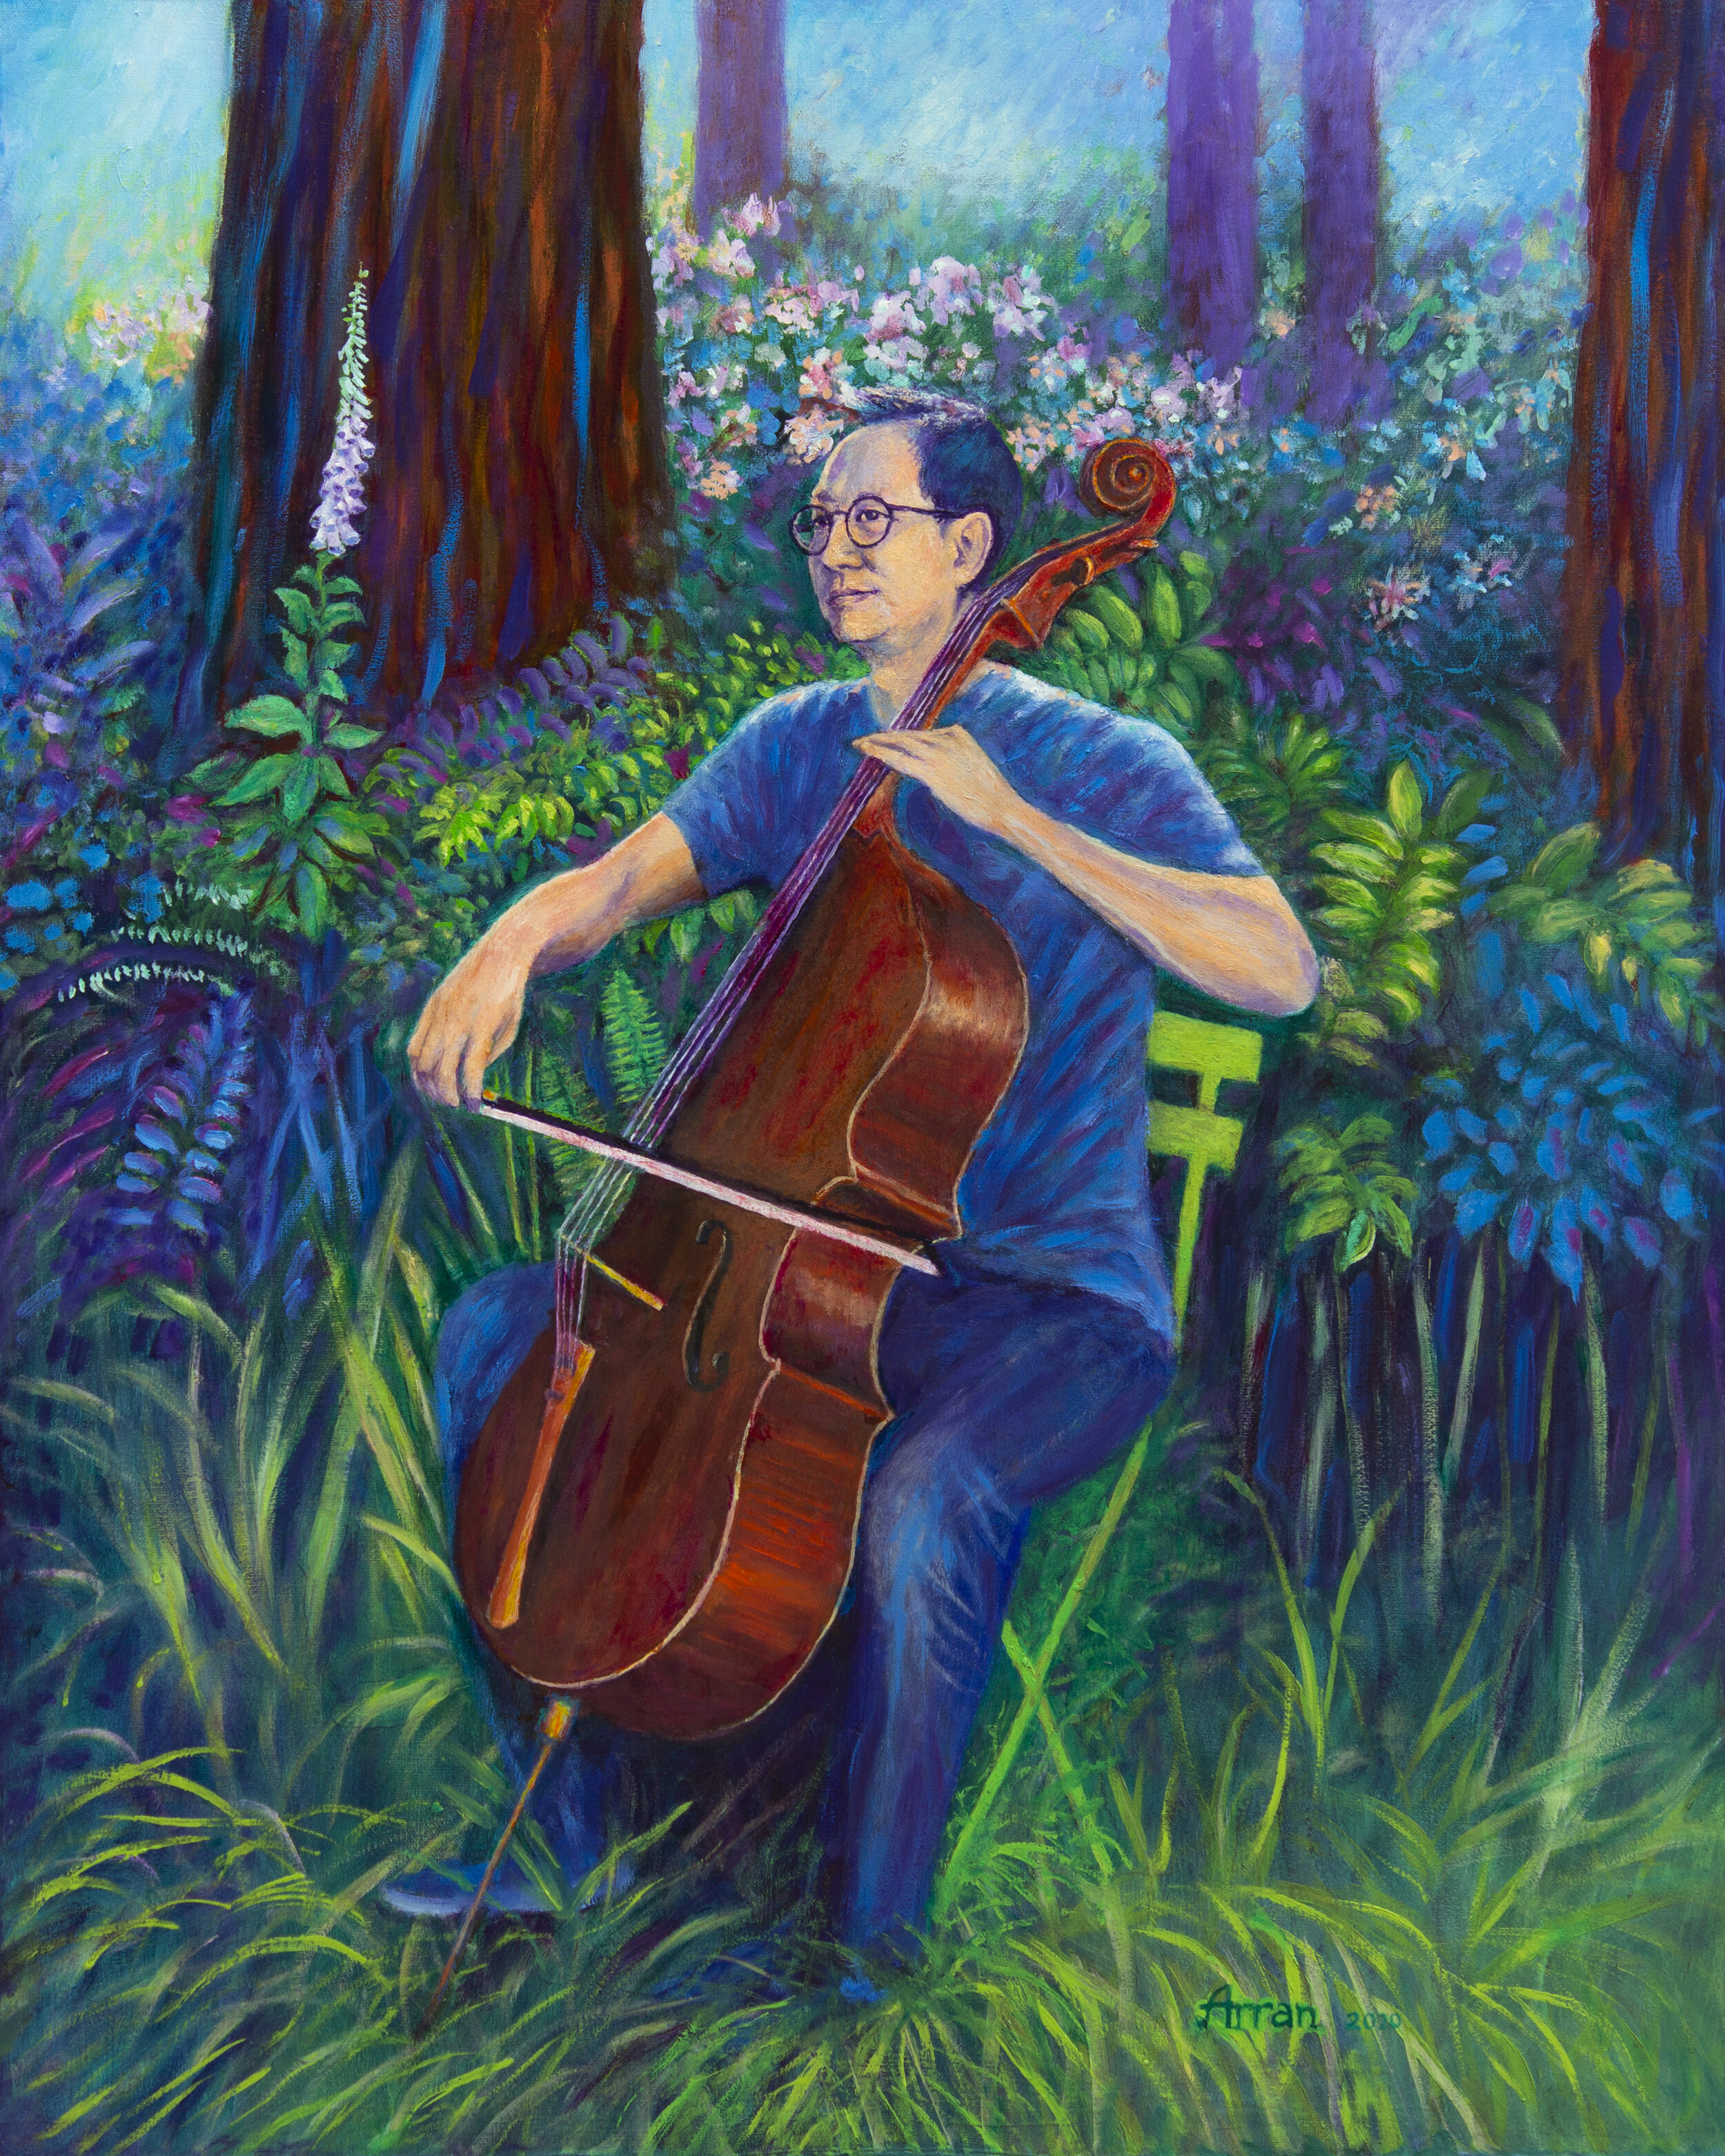 Santa Ono in the redwoods of Shalimar with his beloved cello